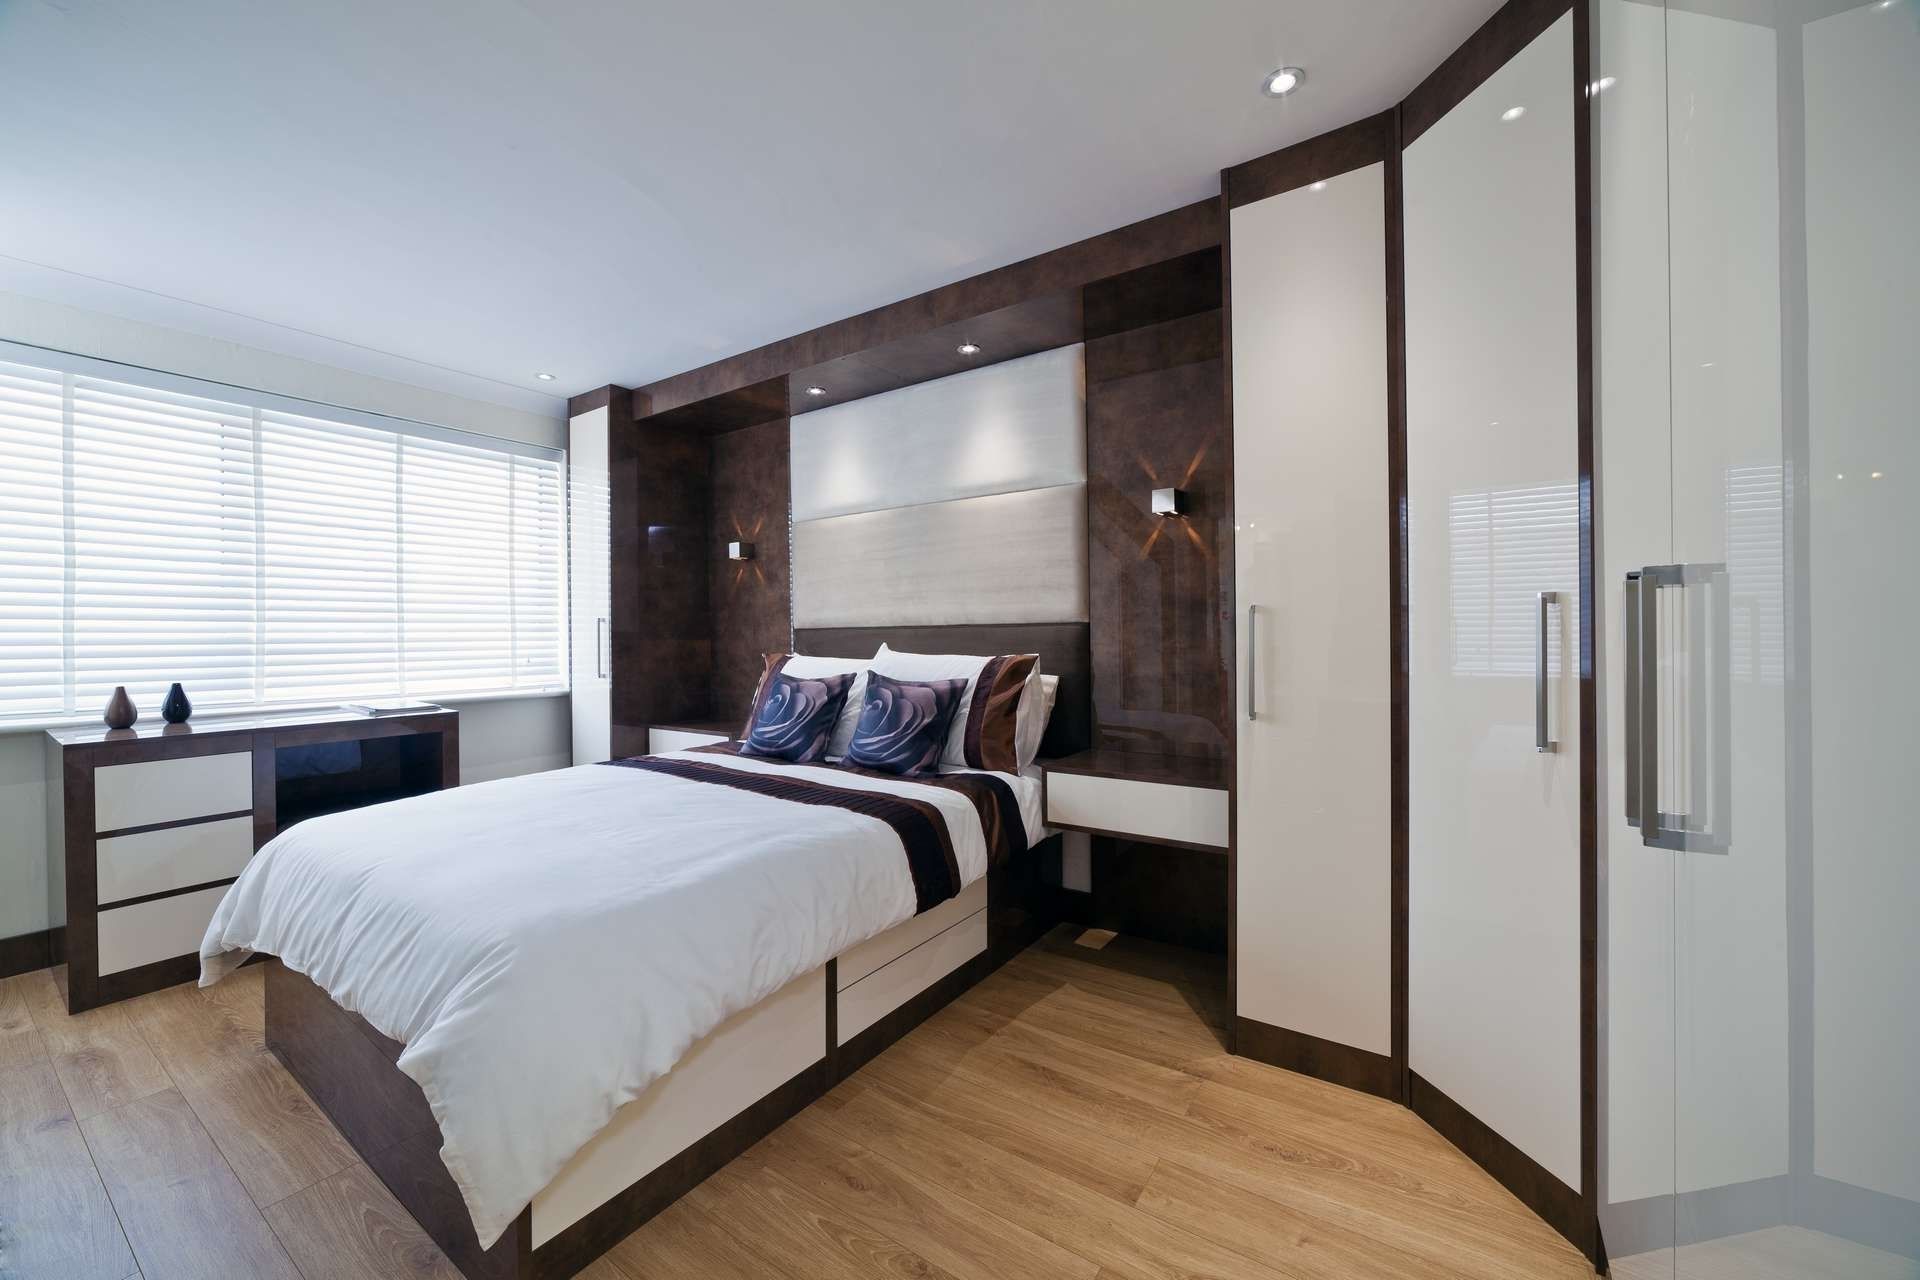 22 Fitted Bedroom Wardrobes Design To Create A Wow Moment Regarding Favorite Bedroom Wardrobes (View 9 of 15)